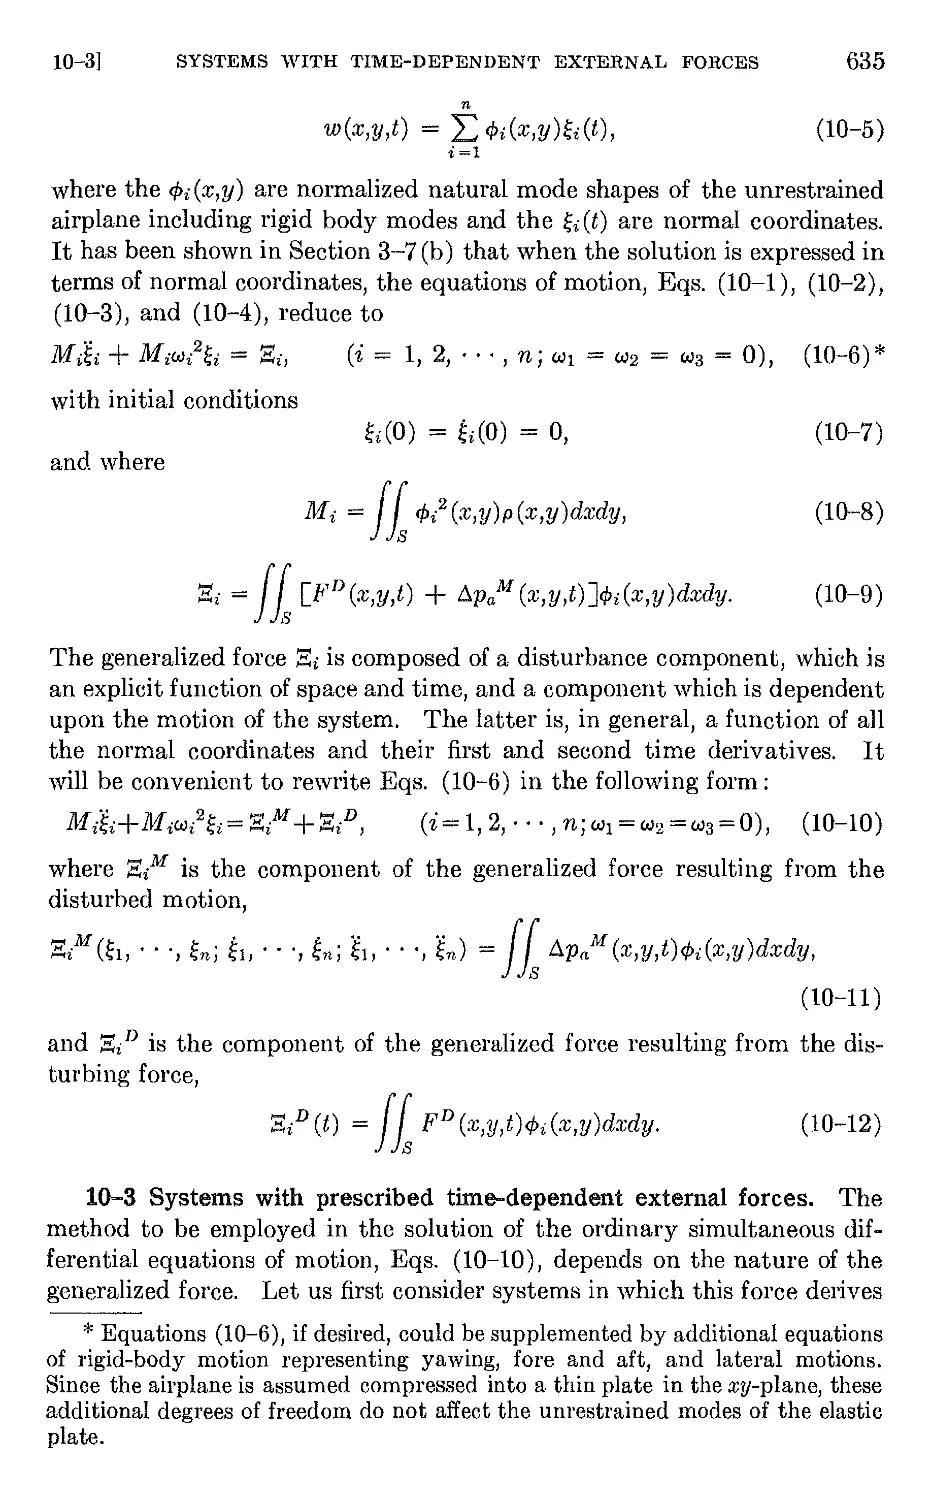 10.3 Systems with prescribed time-dependent external forces